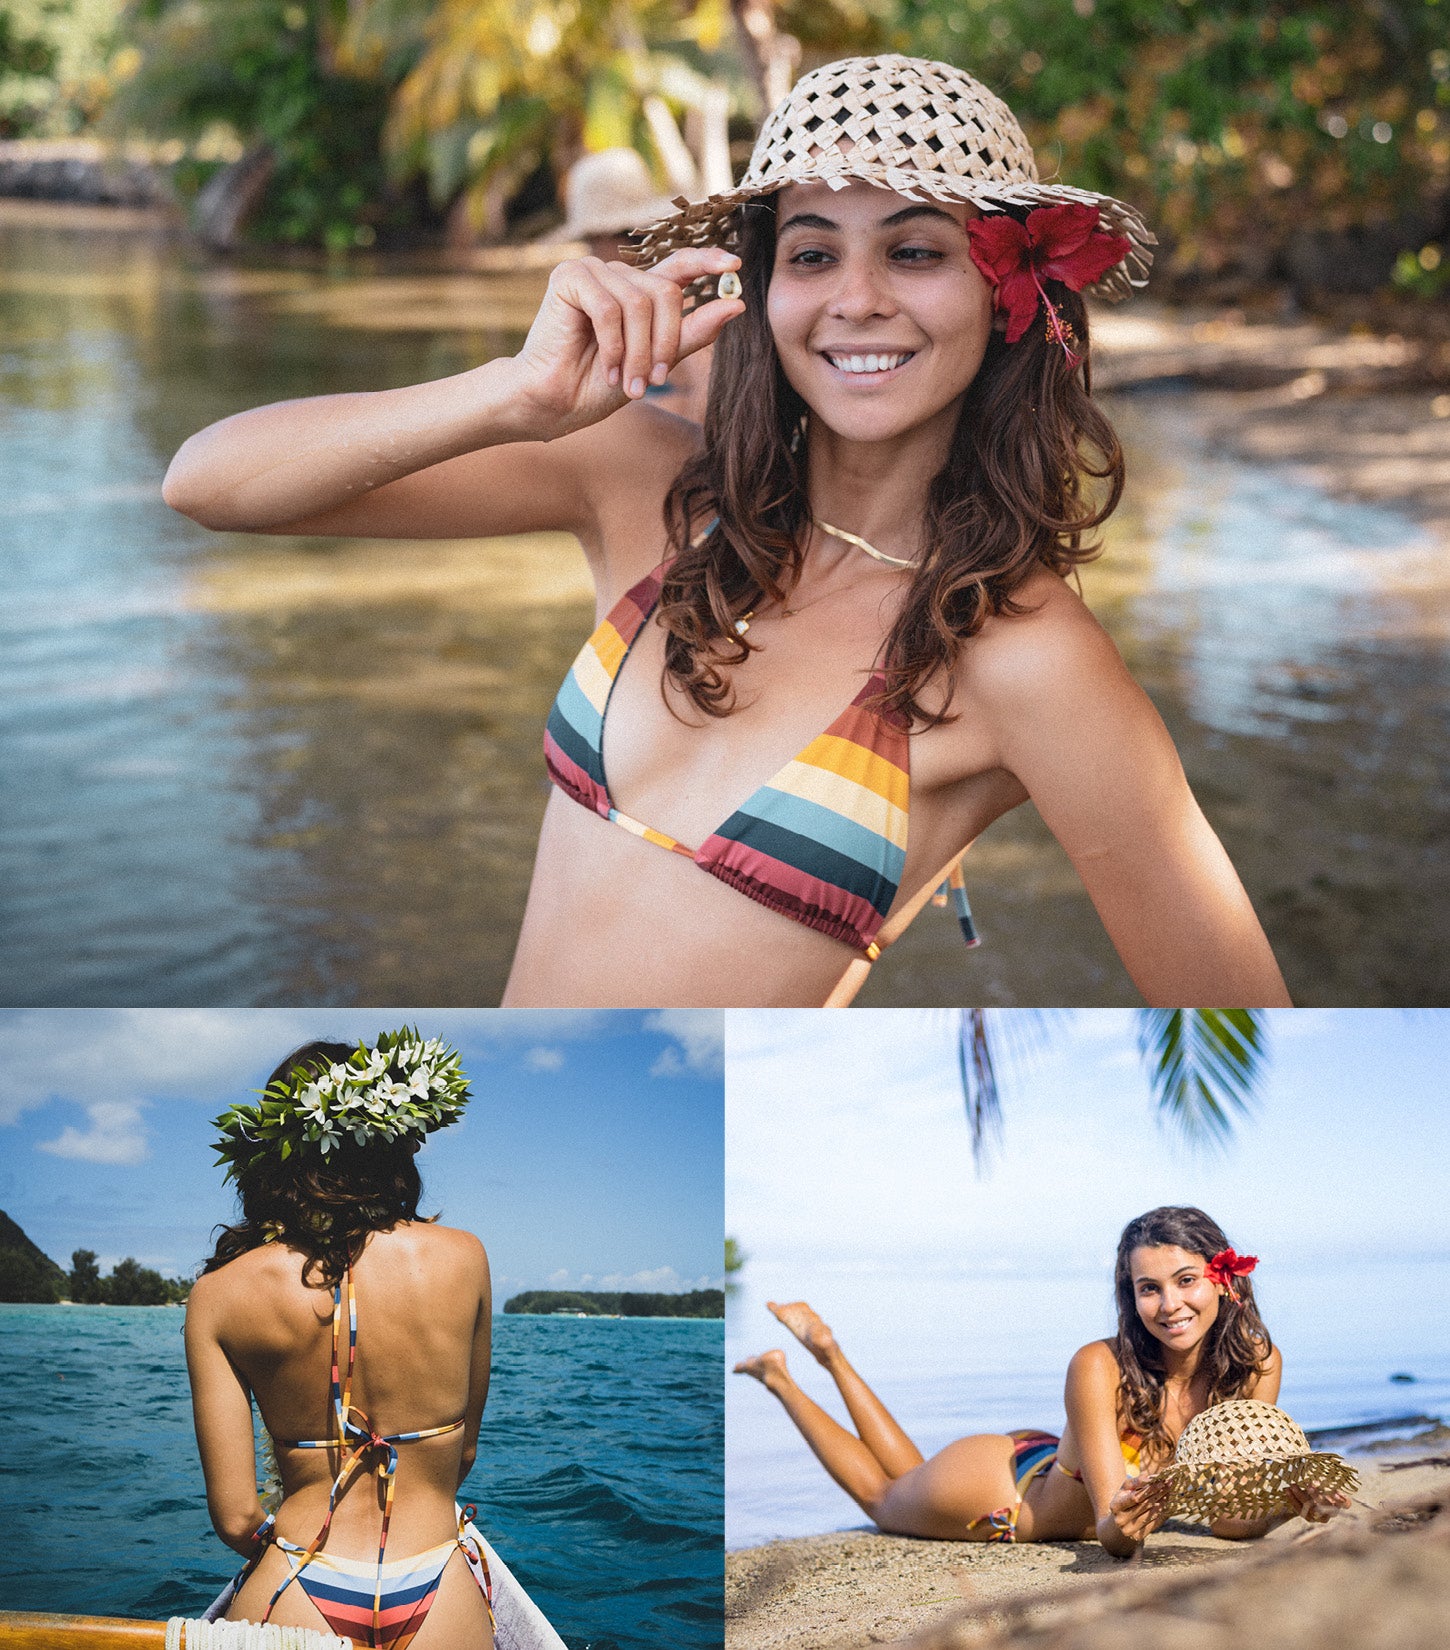 Three images of model wearing one of the Women's Salty Crew Swimwear